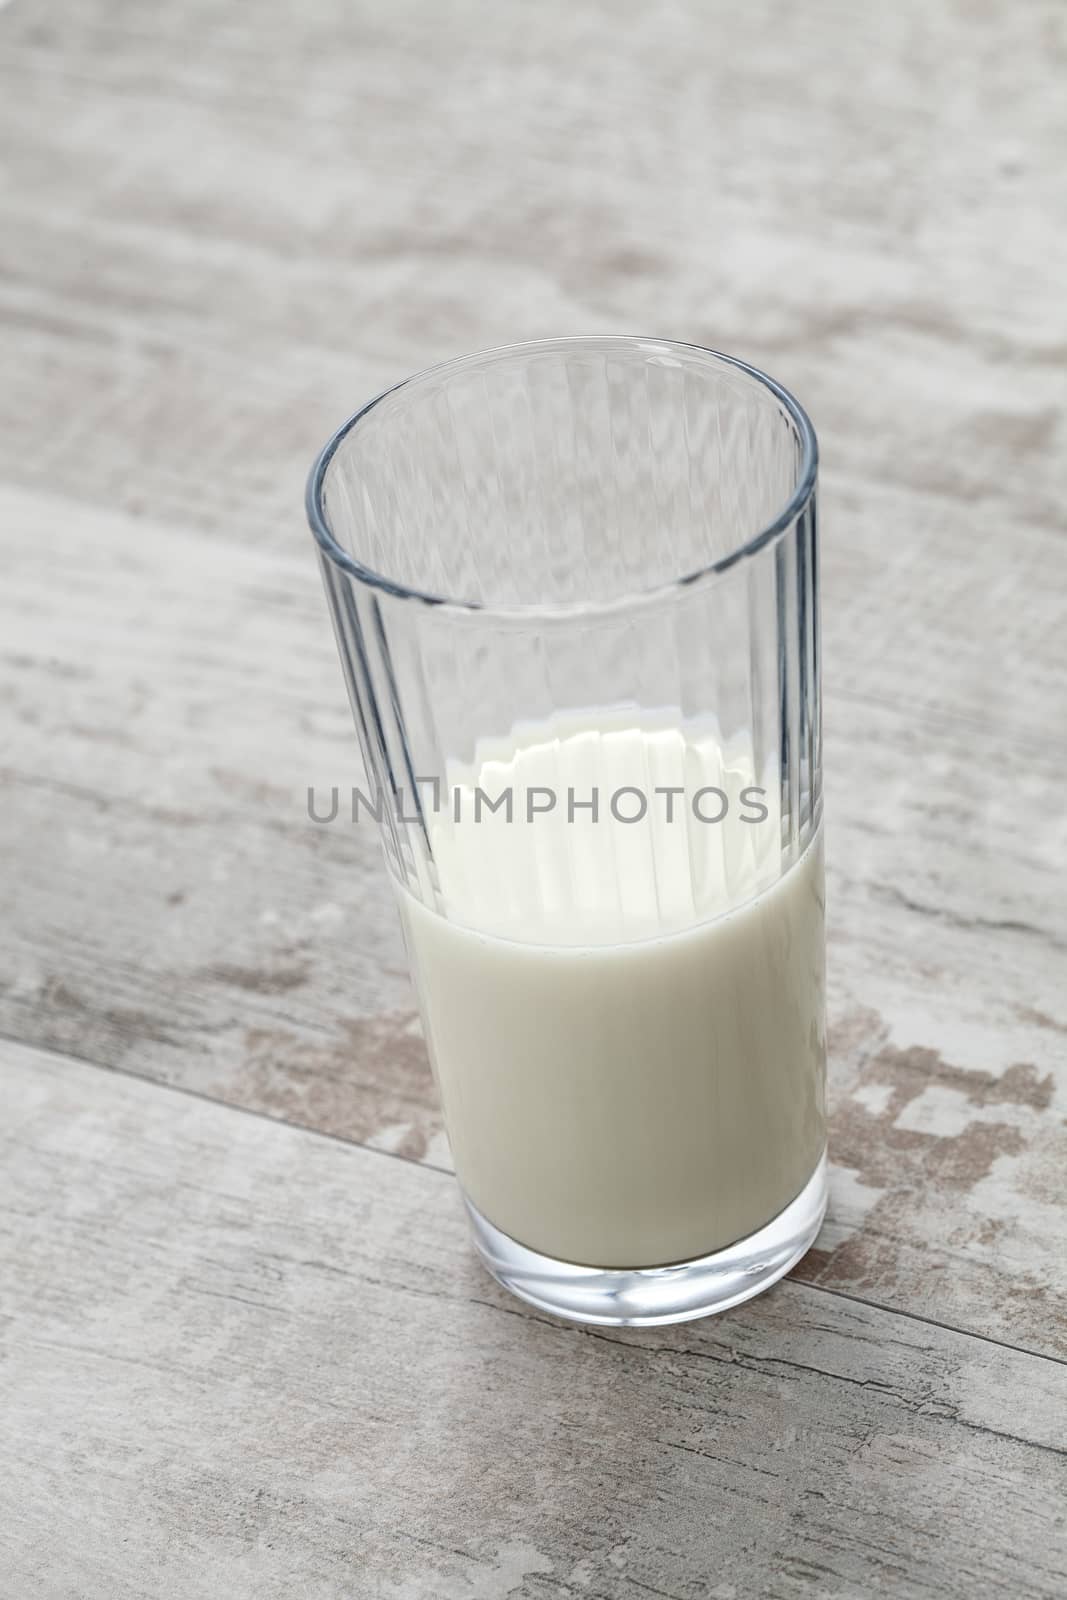 close up view of glass filled with fresh milk on wooden table